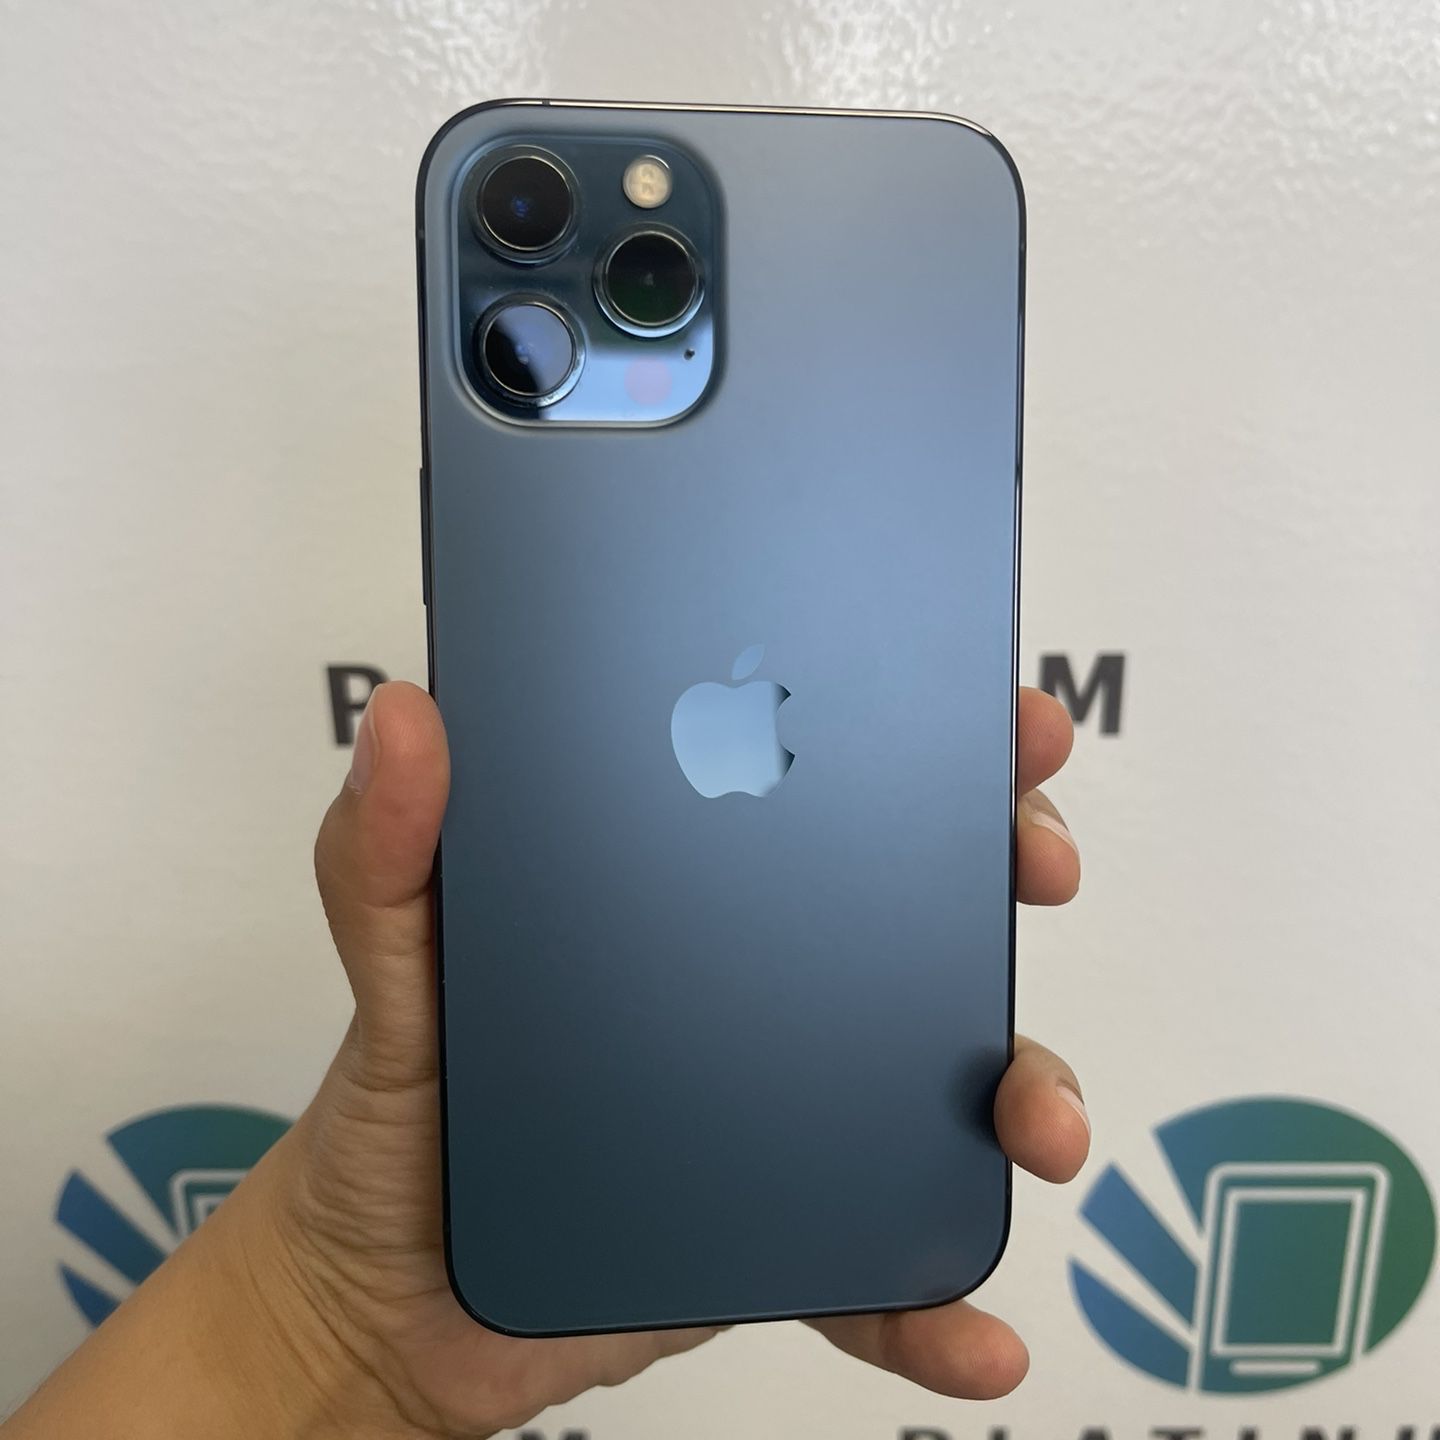 🔝📲 iPhone 12 Pro Max 512 GB AT&T BH100% 🔋 Case And Headphones For Free 🔥💯